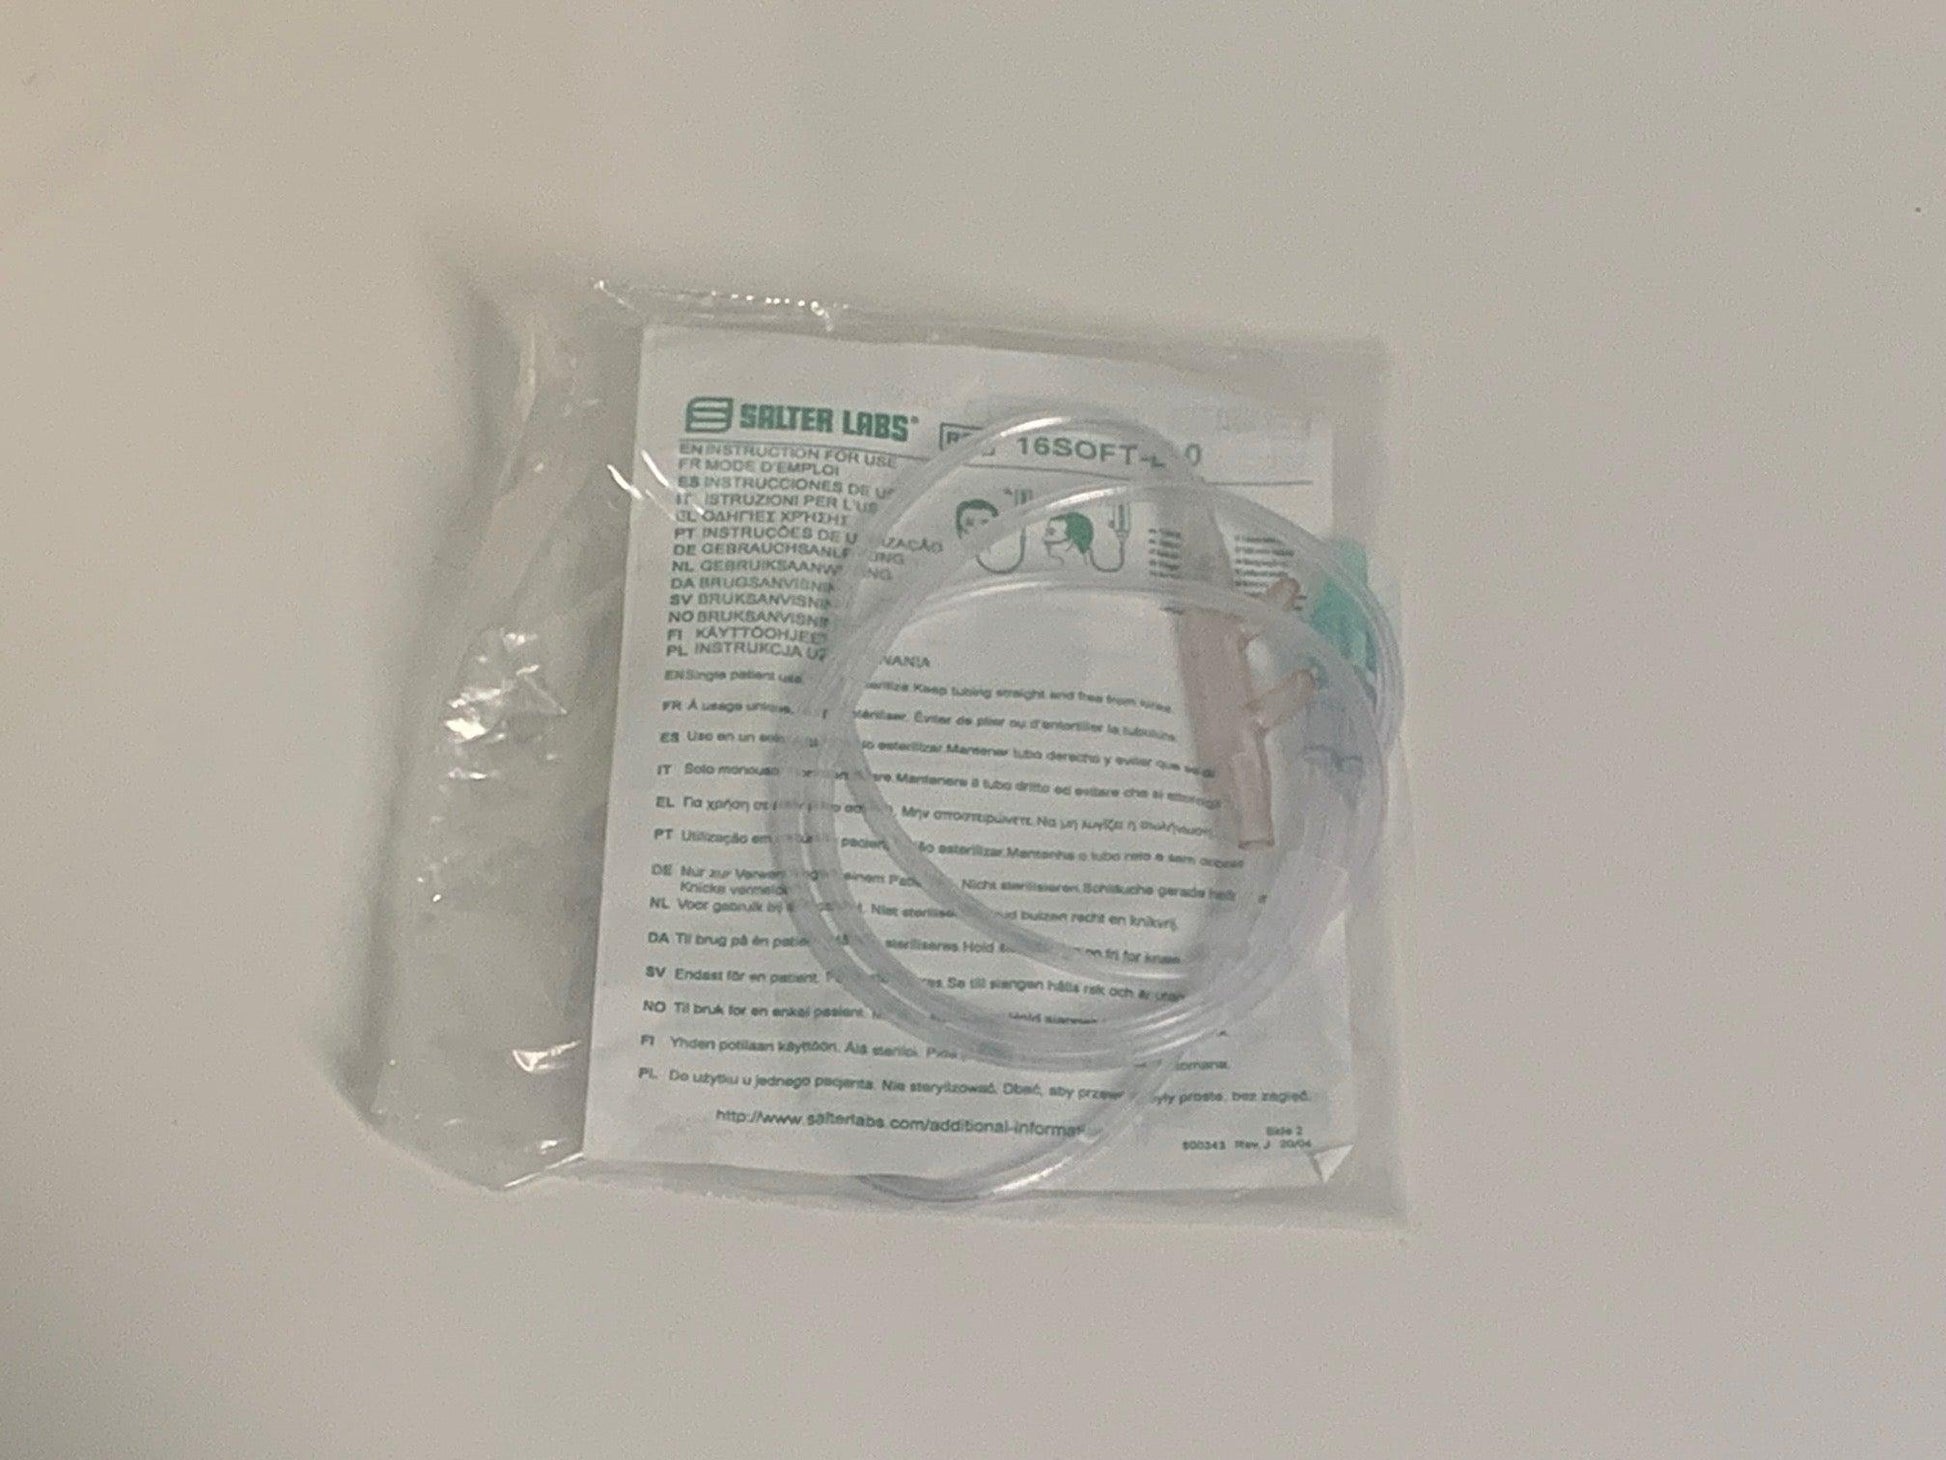 NEW Salter Labs 50' Green Oxygen Tubing 2050G-50 with Adult Soft Oxygen Nasal Cannula with Barbed Connector 16SOFT-B-0 - MBR Medicals